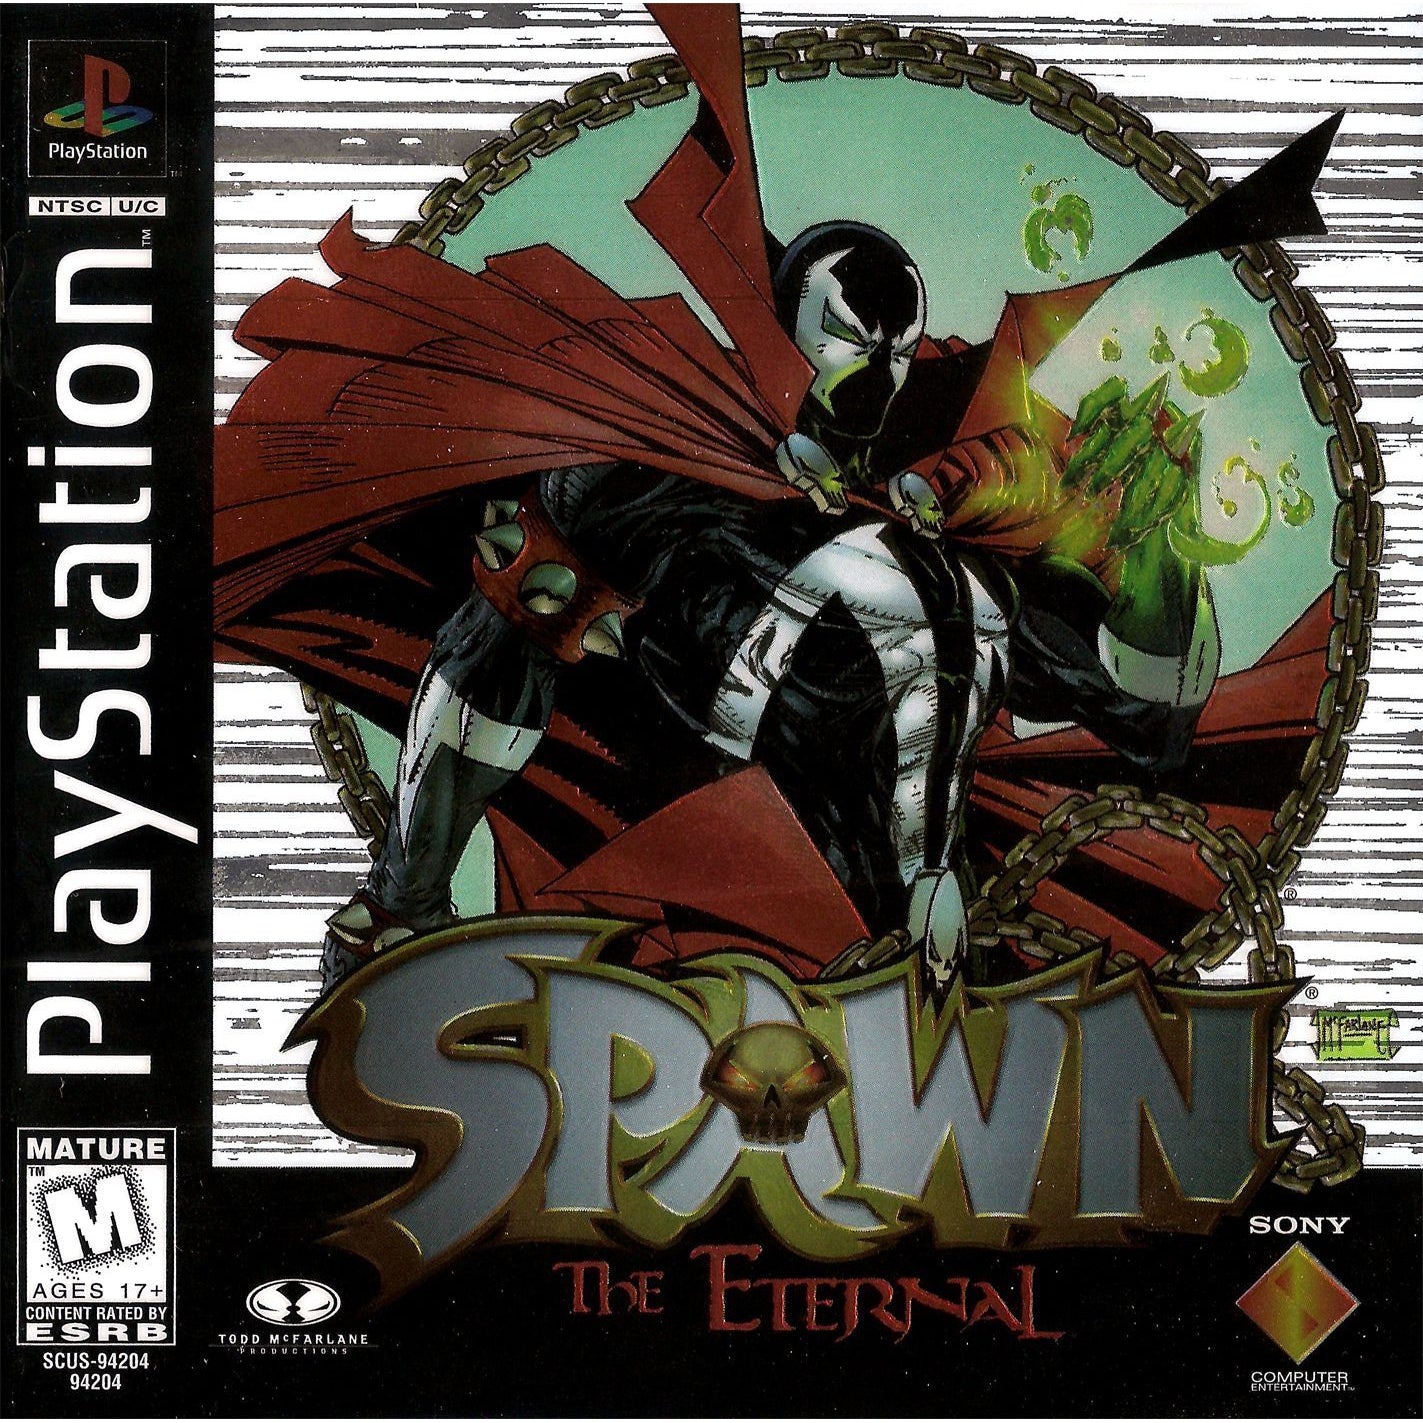 Spawn: The Eternal - PlayStation 1 (PS1) Game Complete - YourGamingShop.com - Buy, Sell, Trade Video Games Online. 120 Day Warranty. Satisfaction Guaranteed.